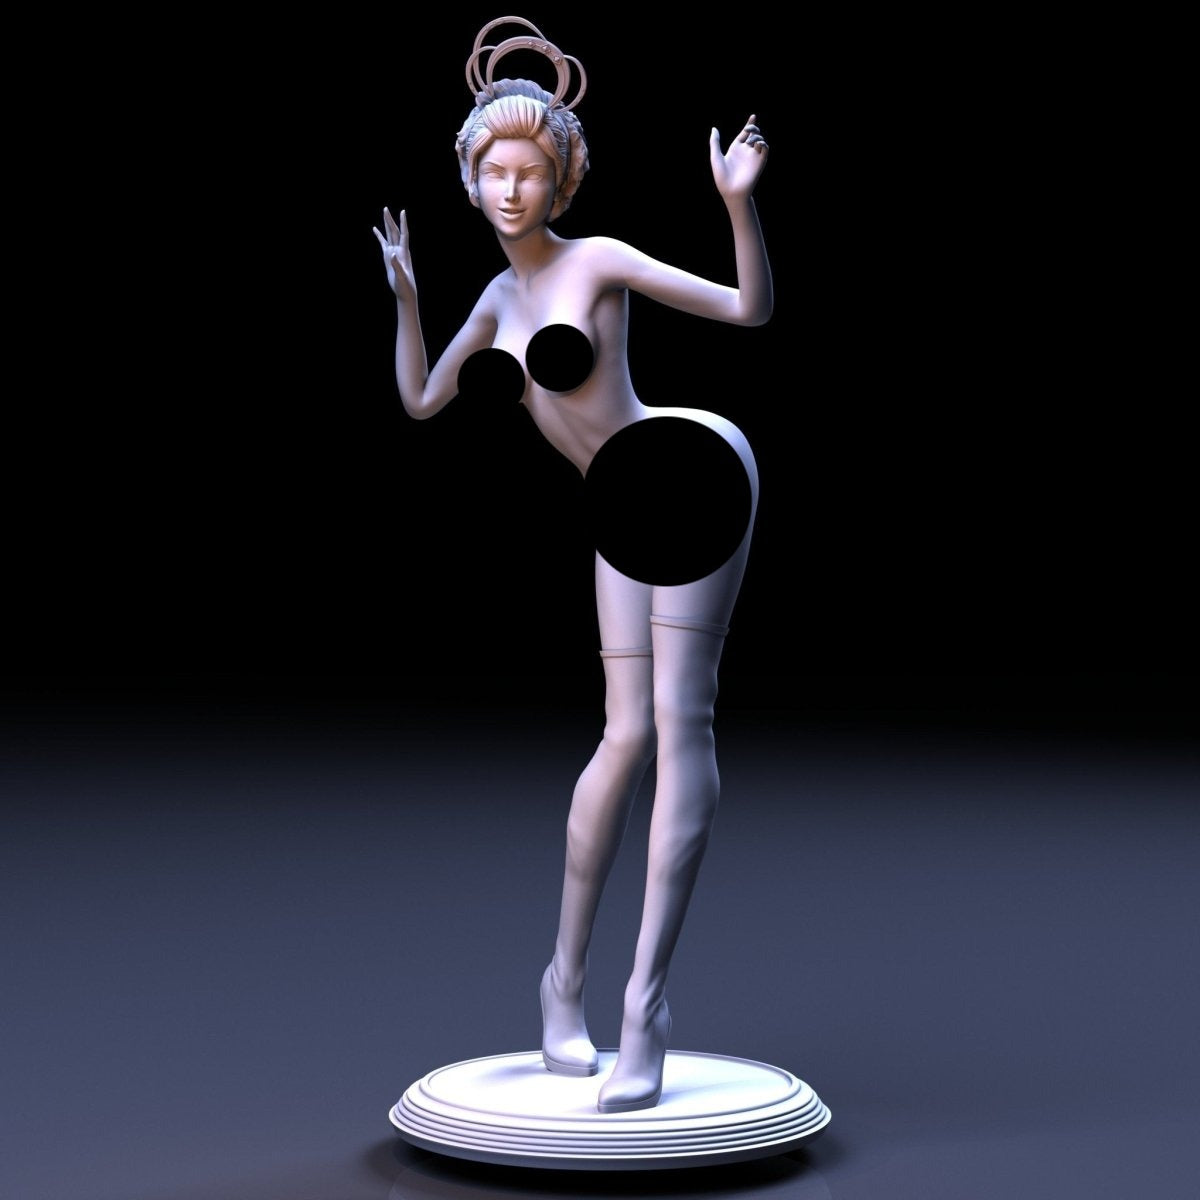 NSFW Resin Miniature Space Girl 2 NSFW 3D Printed Figurine Fanart Unpainted Miniature Scaled Models